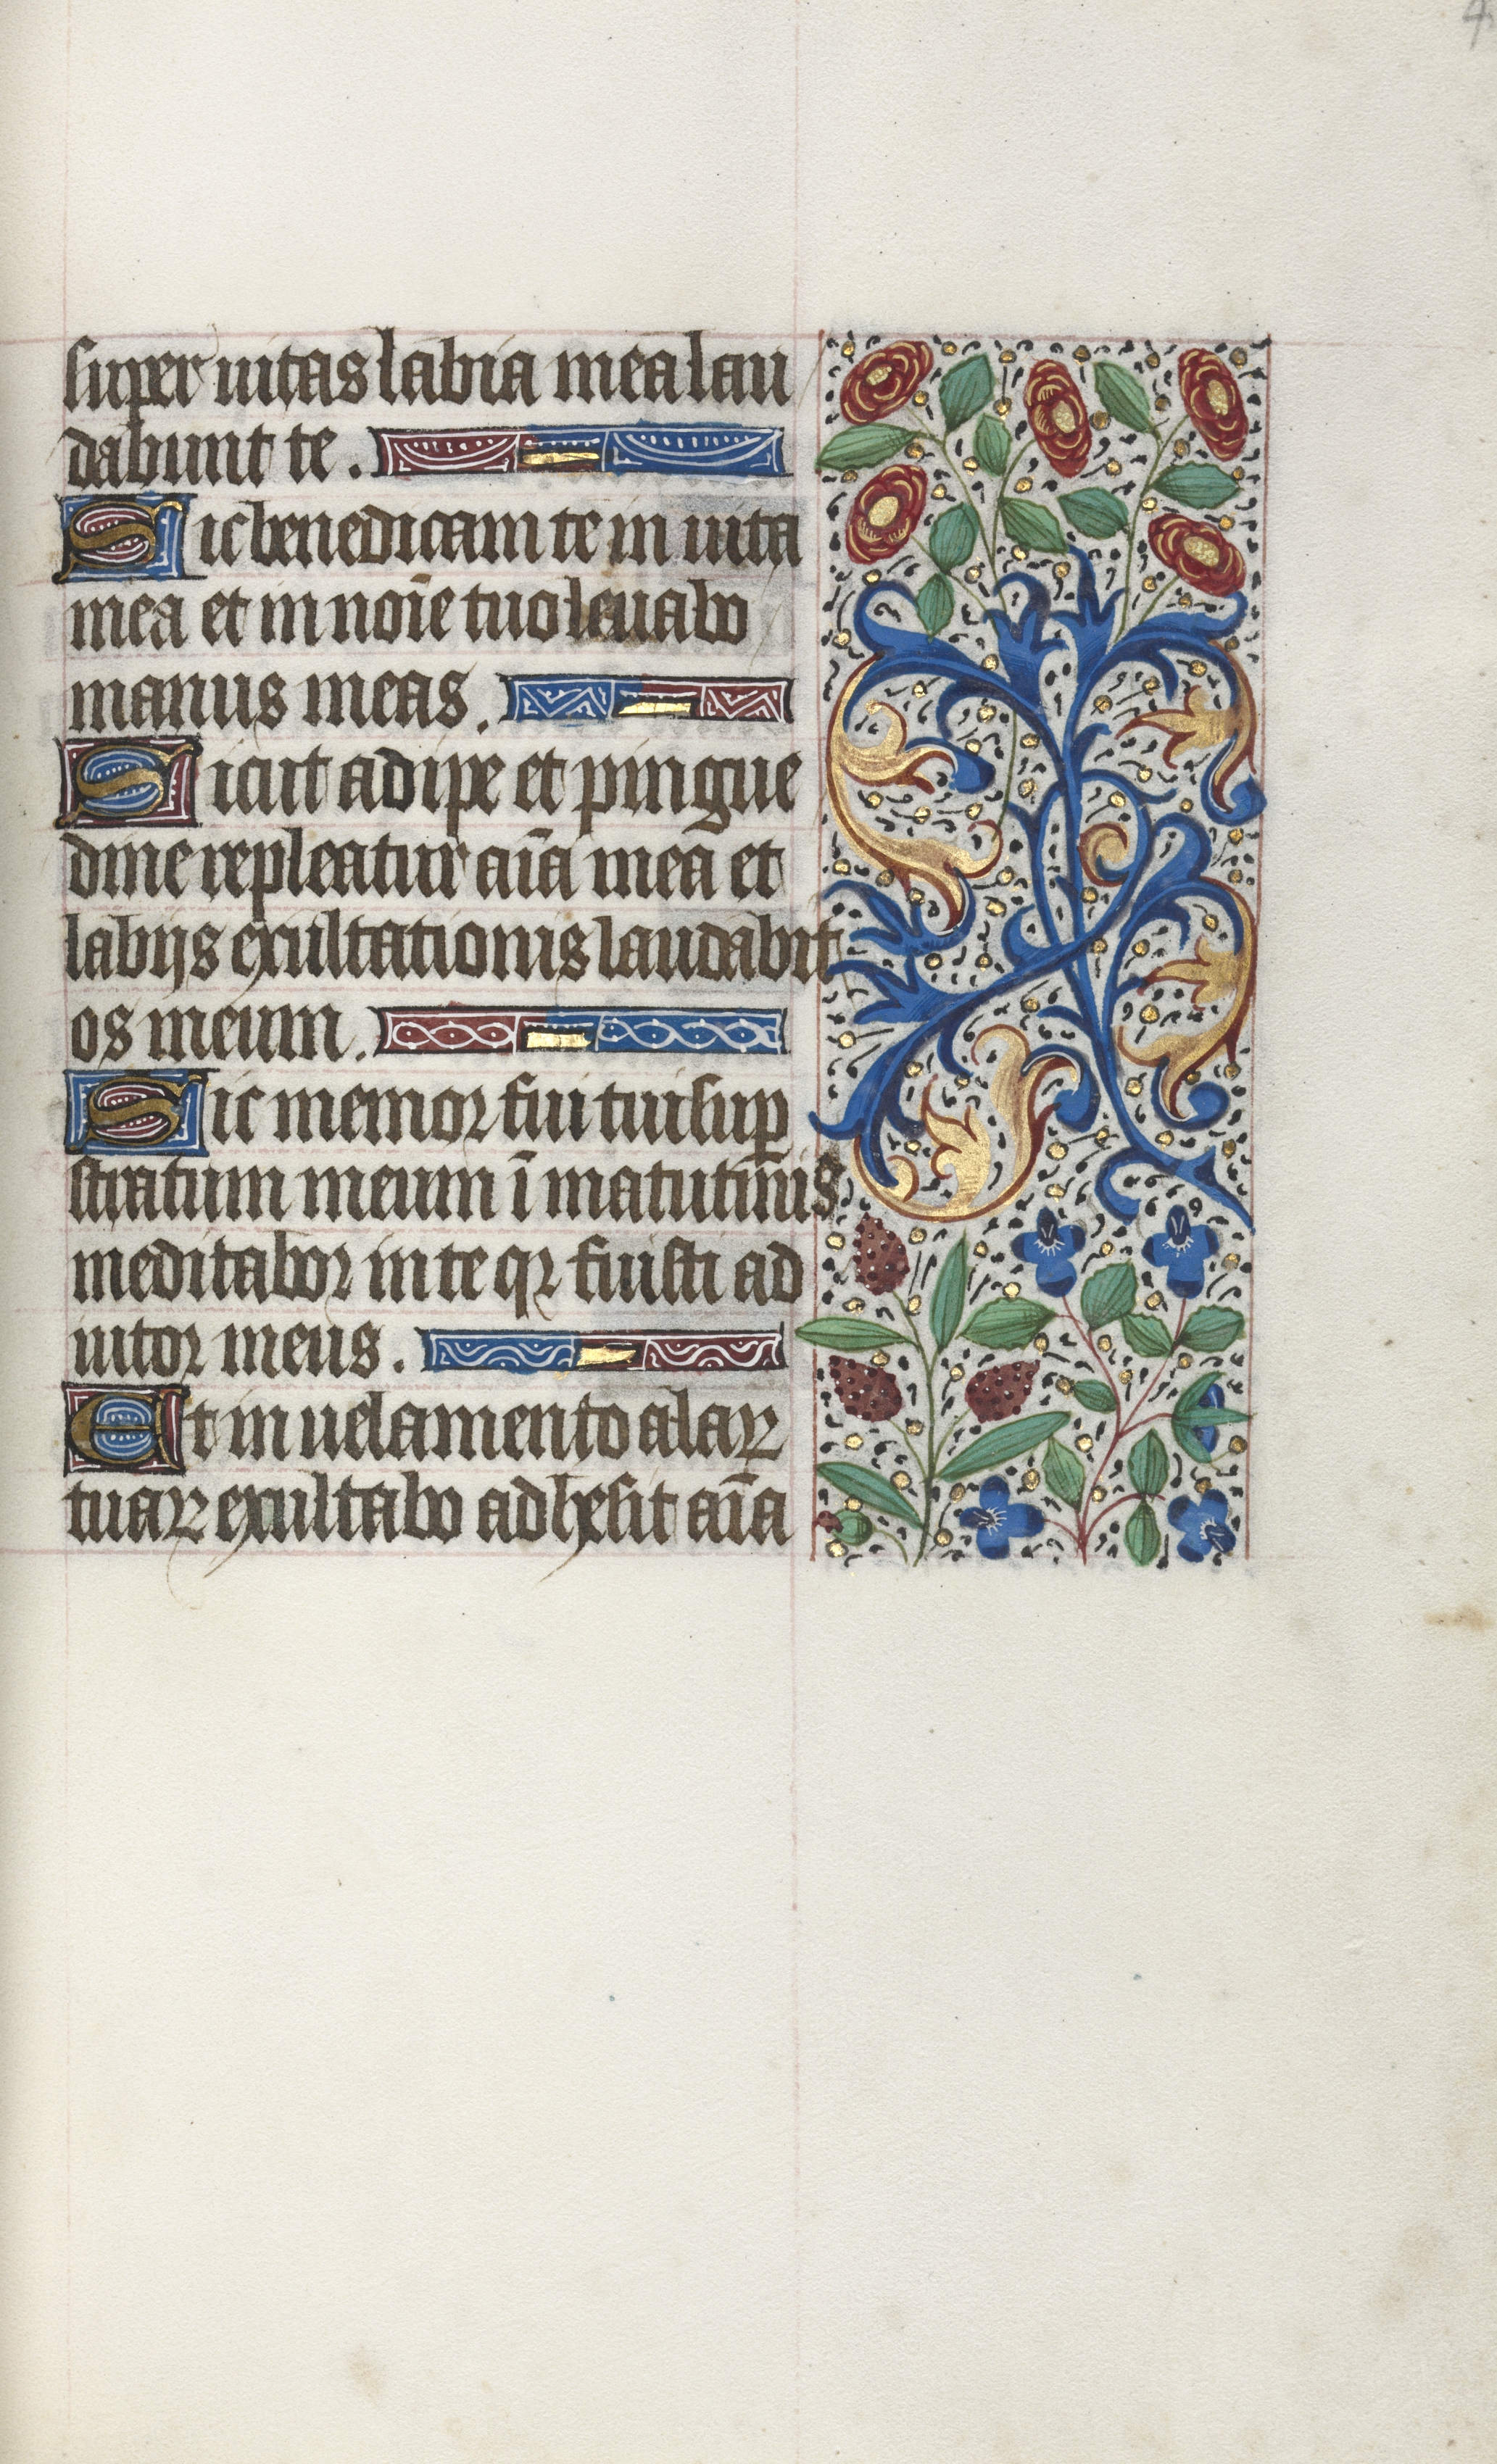 Book of Hours (Use of Rouen): fol. 40r